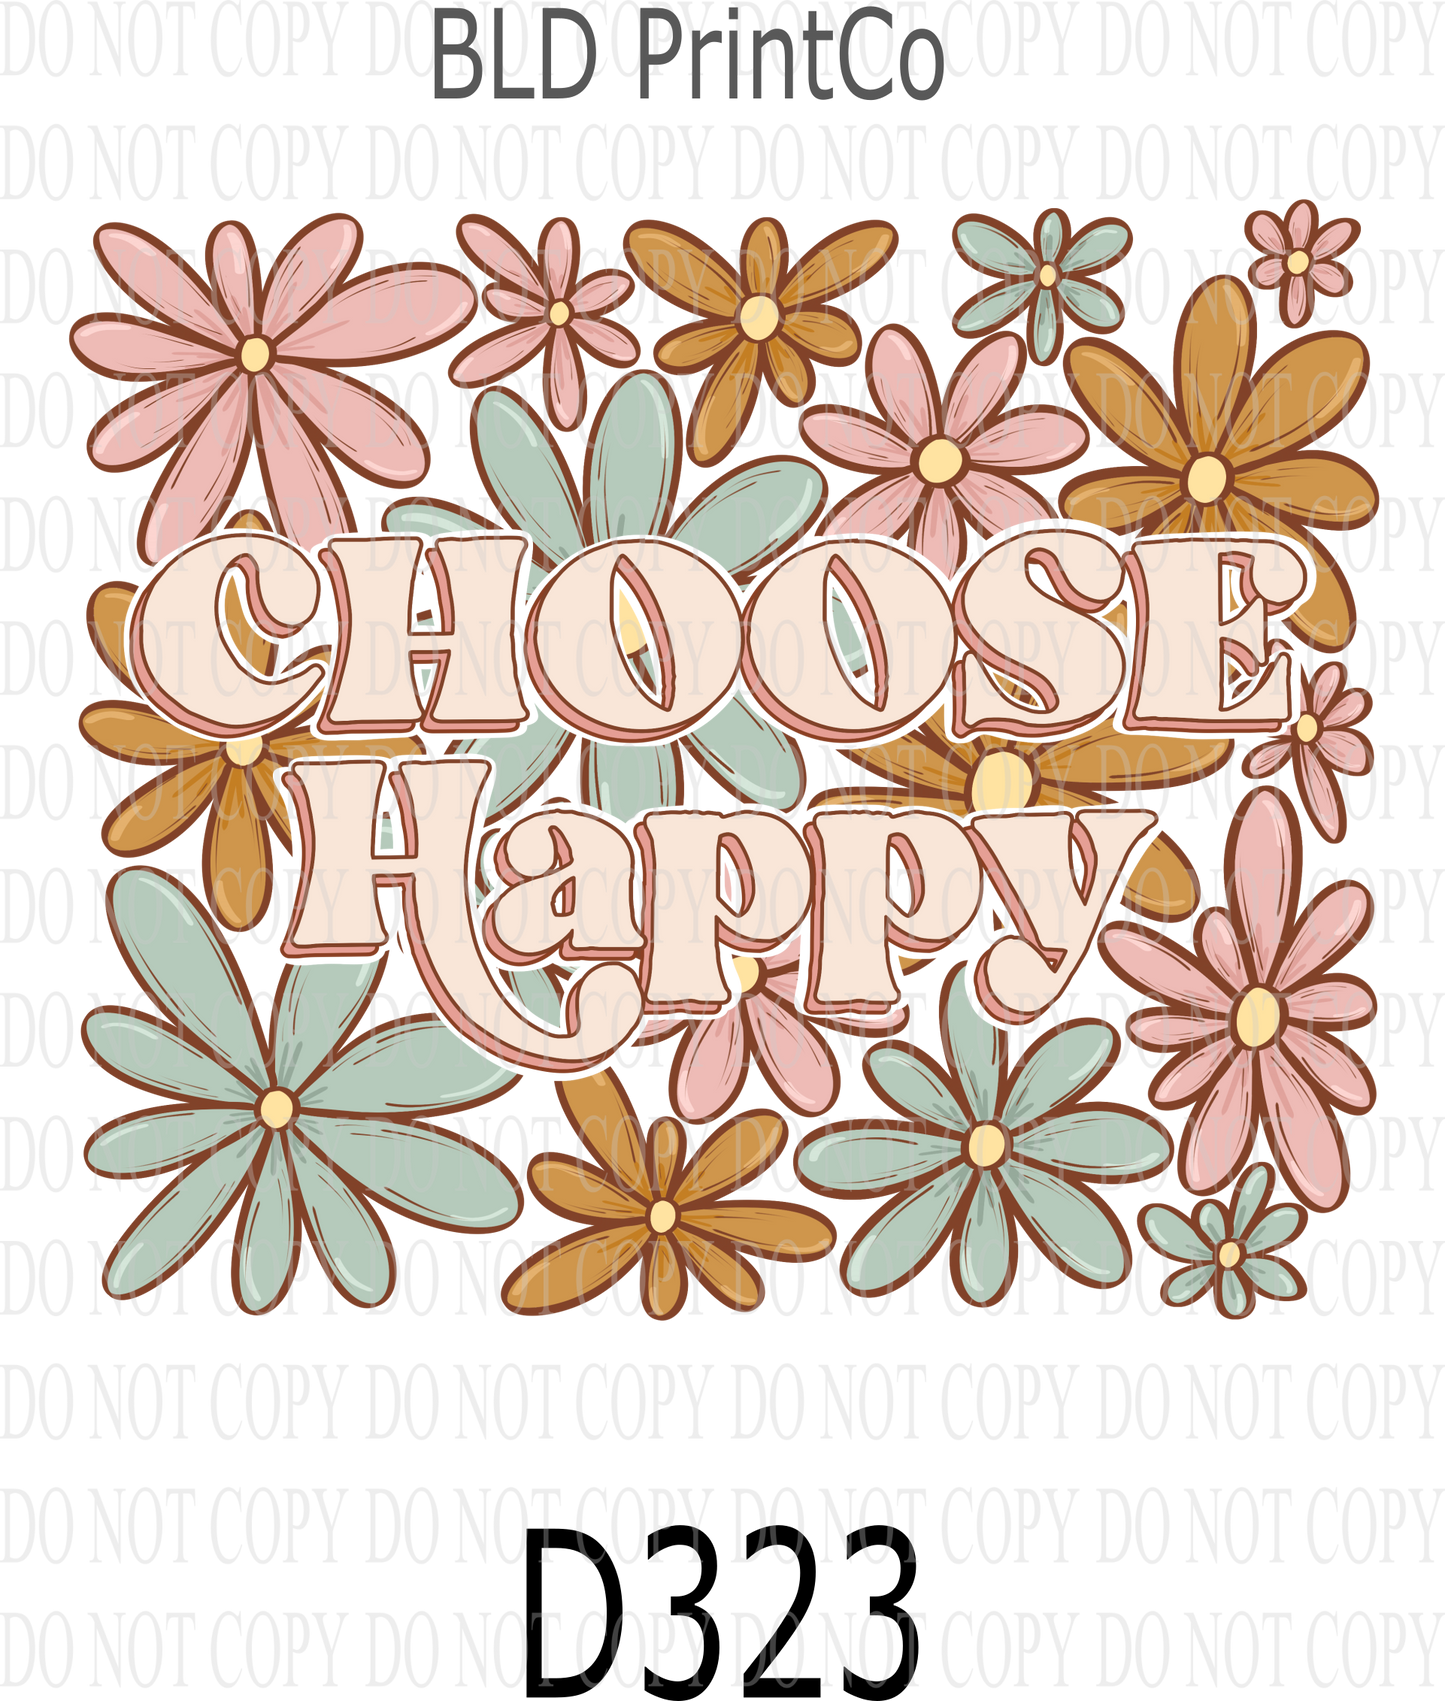 D323 Choose Happy  :: Clear Decal :: VC Decal